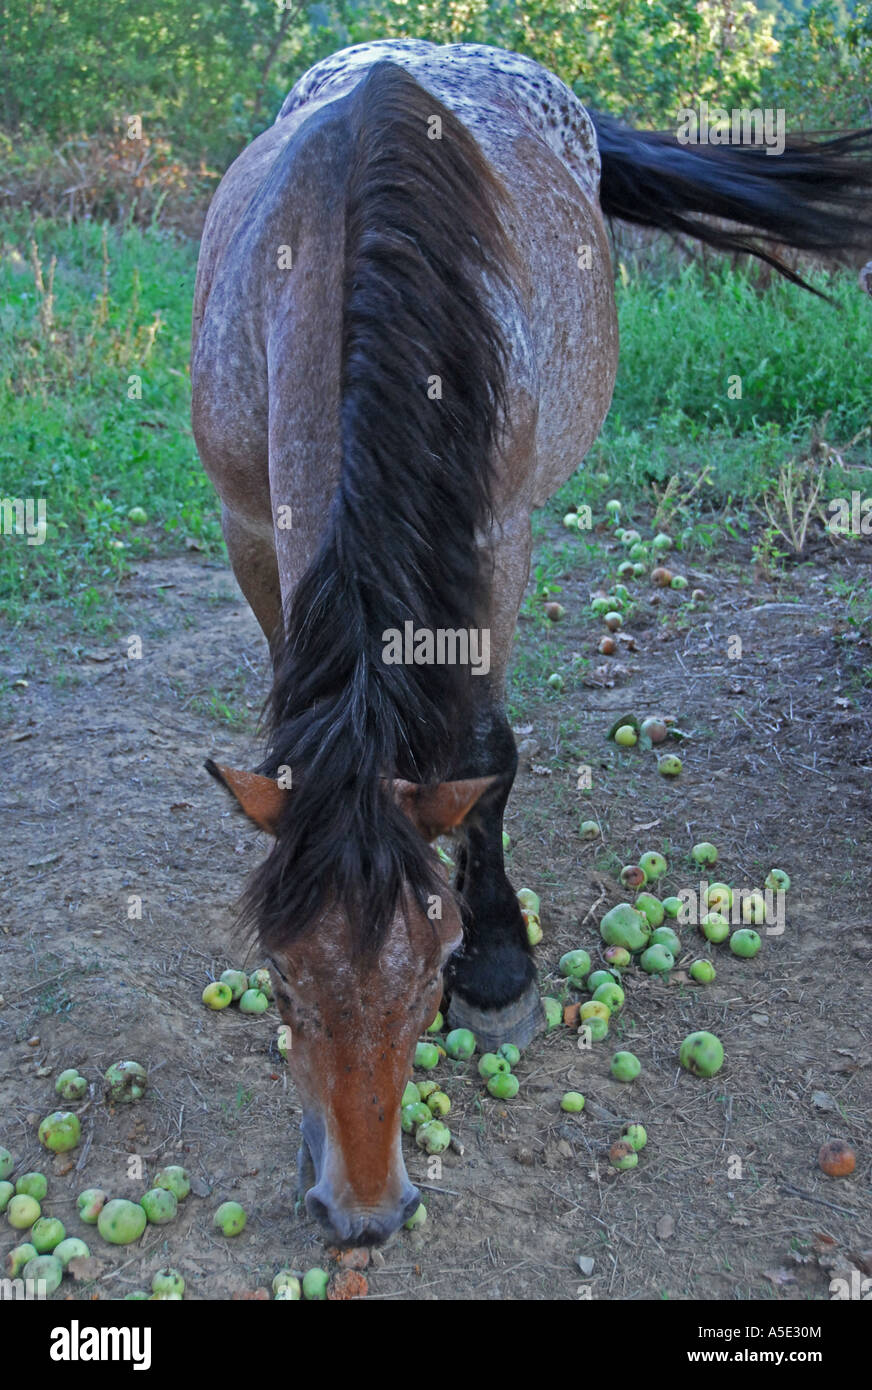 Ardennes Draught Horse eating apples. Lunigiana, Tuscany, Northern Italy, Europe. Stock Photo